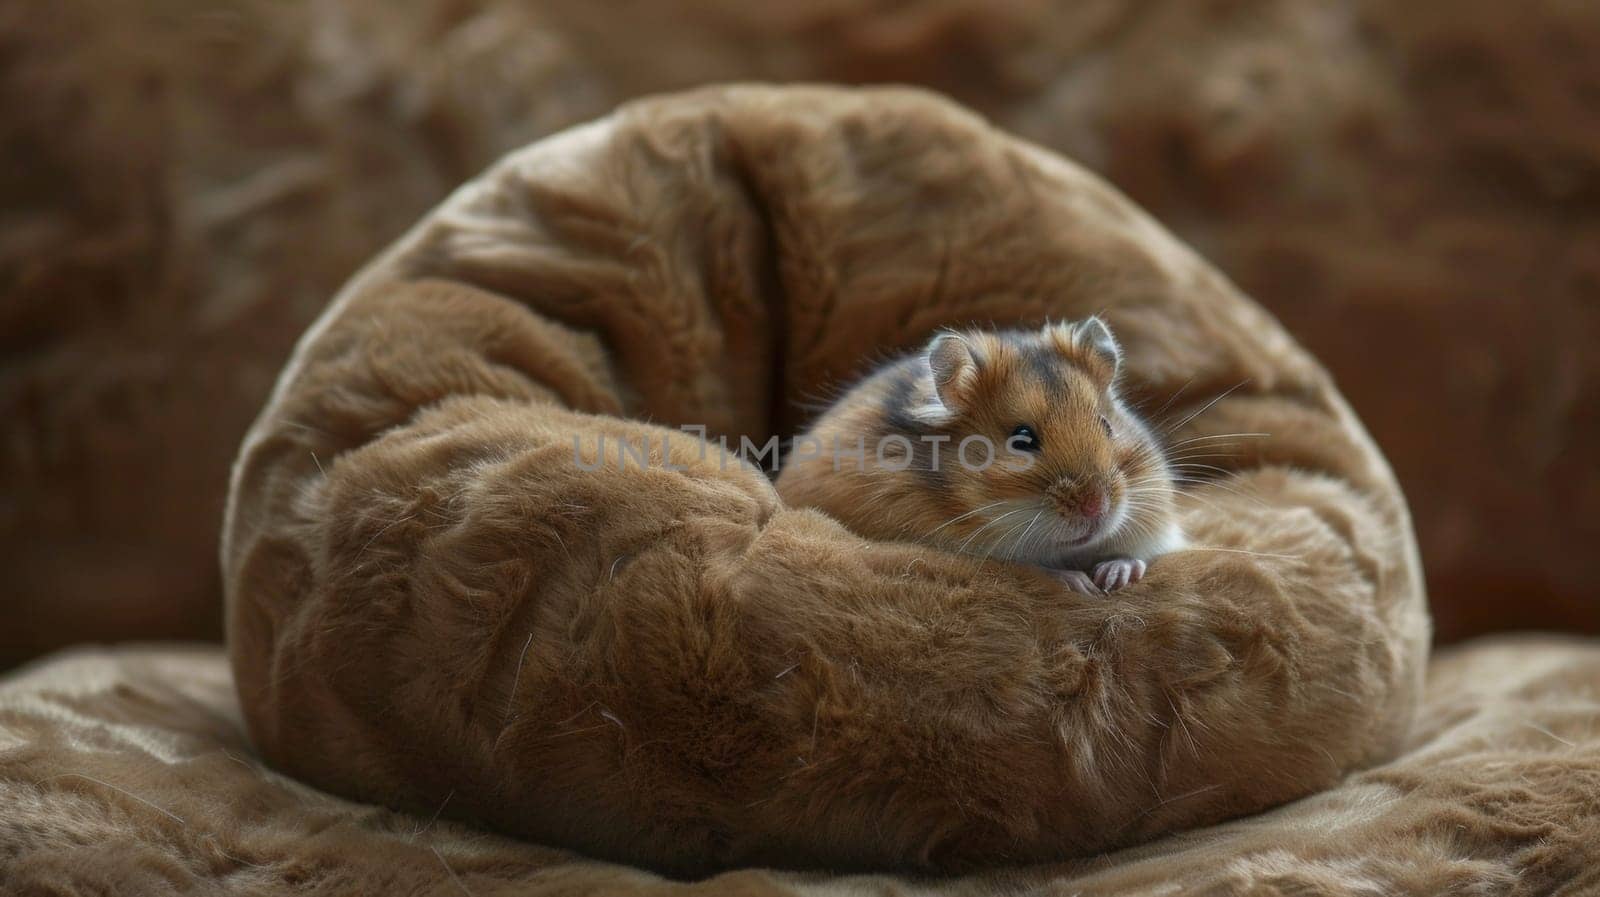 A small brown and white hamster sitting in a furry bean bag, AI by starush